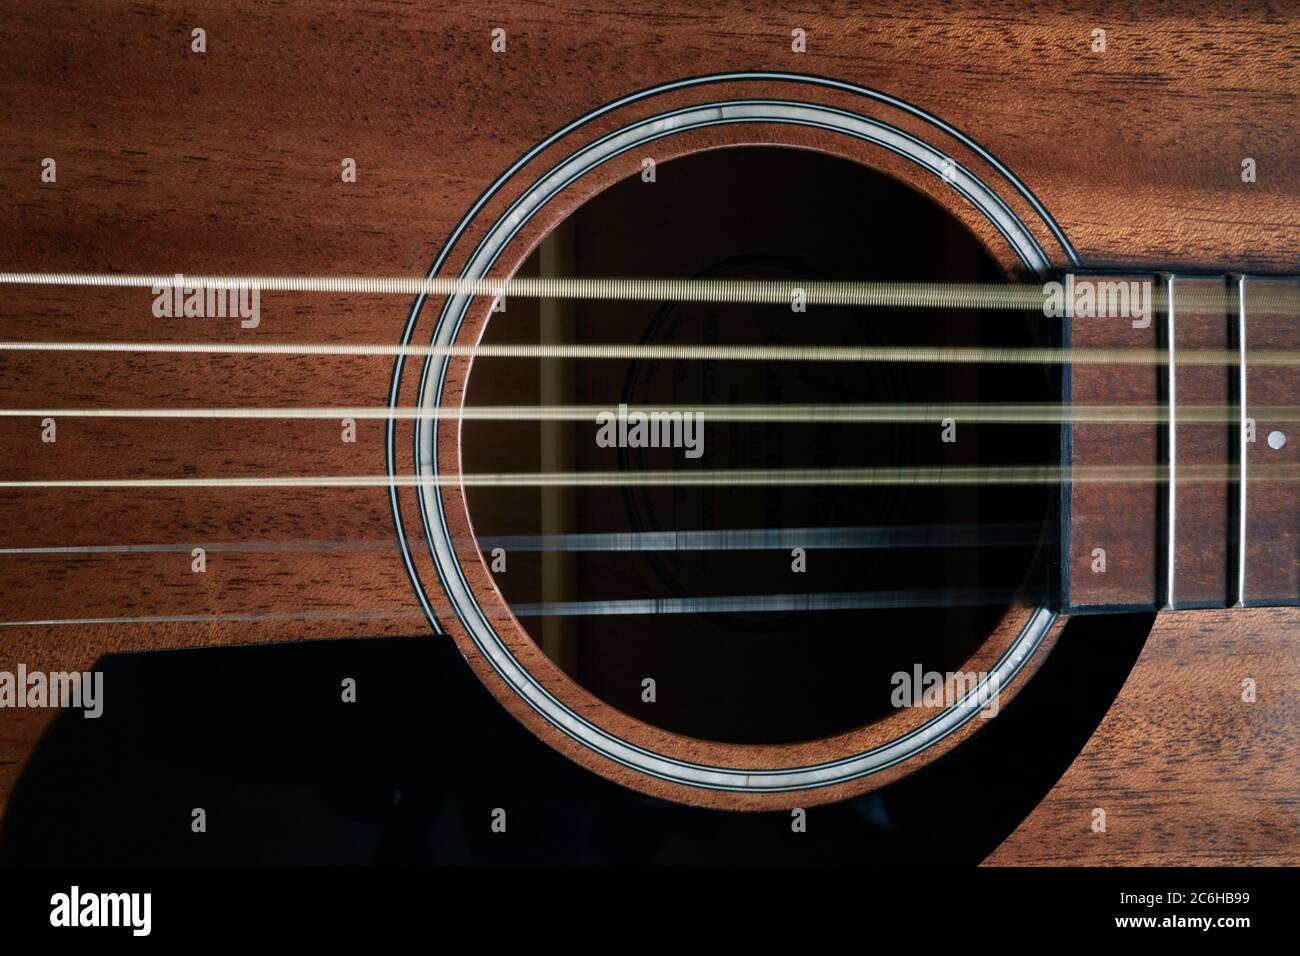 A close up photograph of a Fender acoustic guitar showing the sound hole and part of the fretboard. Guitar strings show movement, wavy guitar strings. Stock Photo